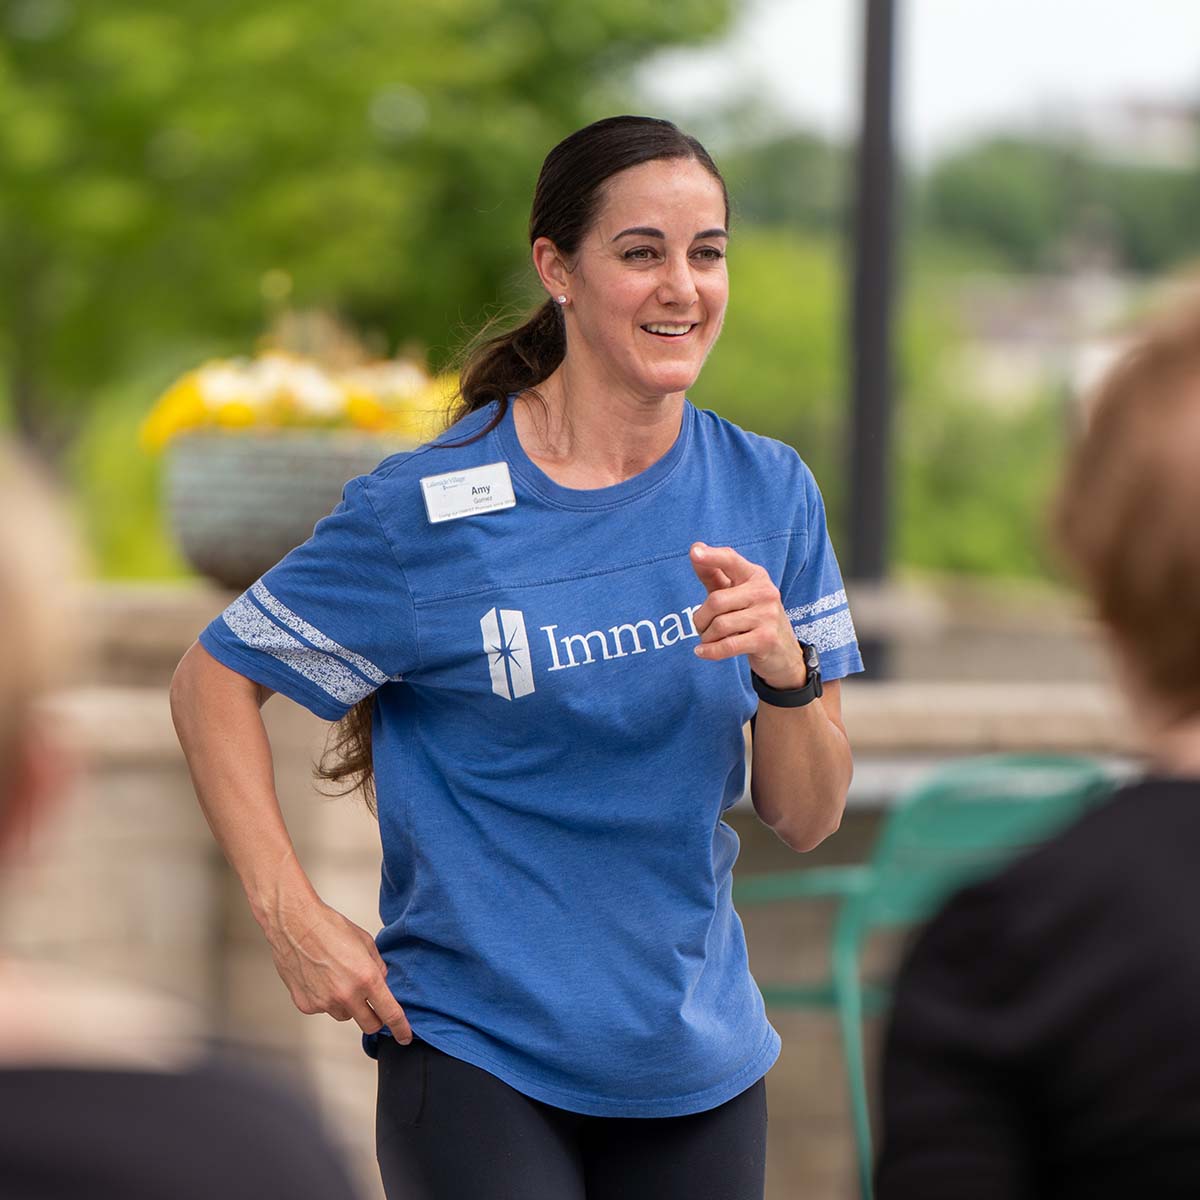 An Immanuel wellness employee leads an exercise session on a patio.